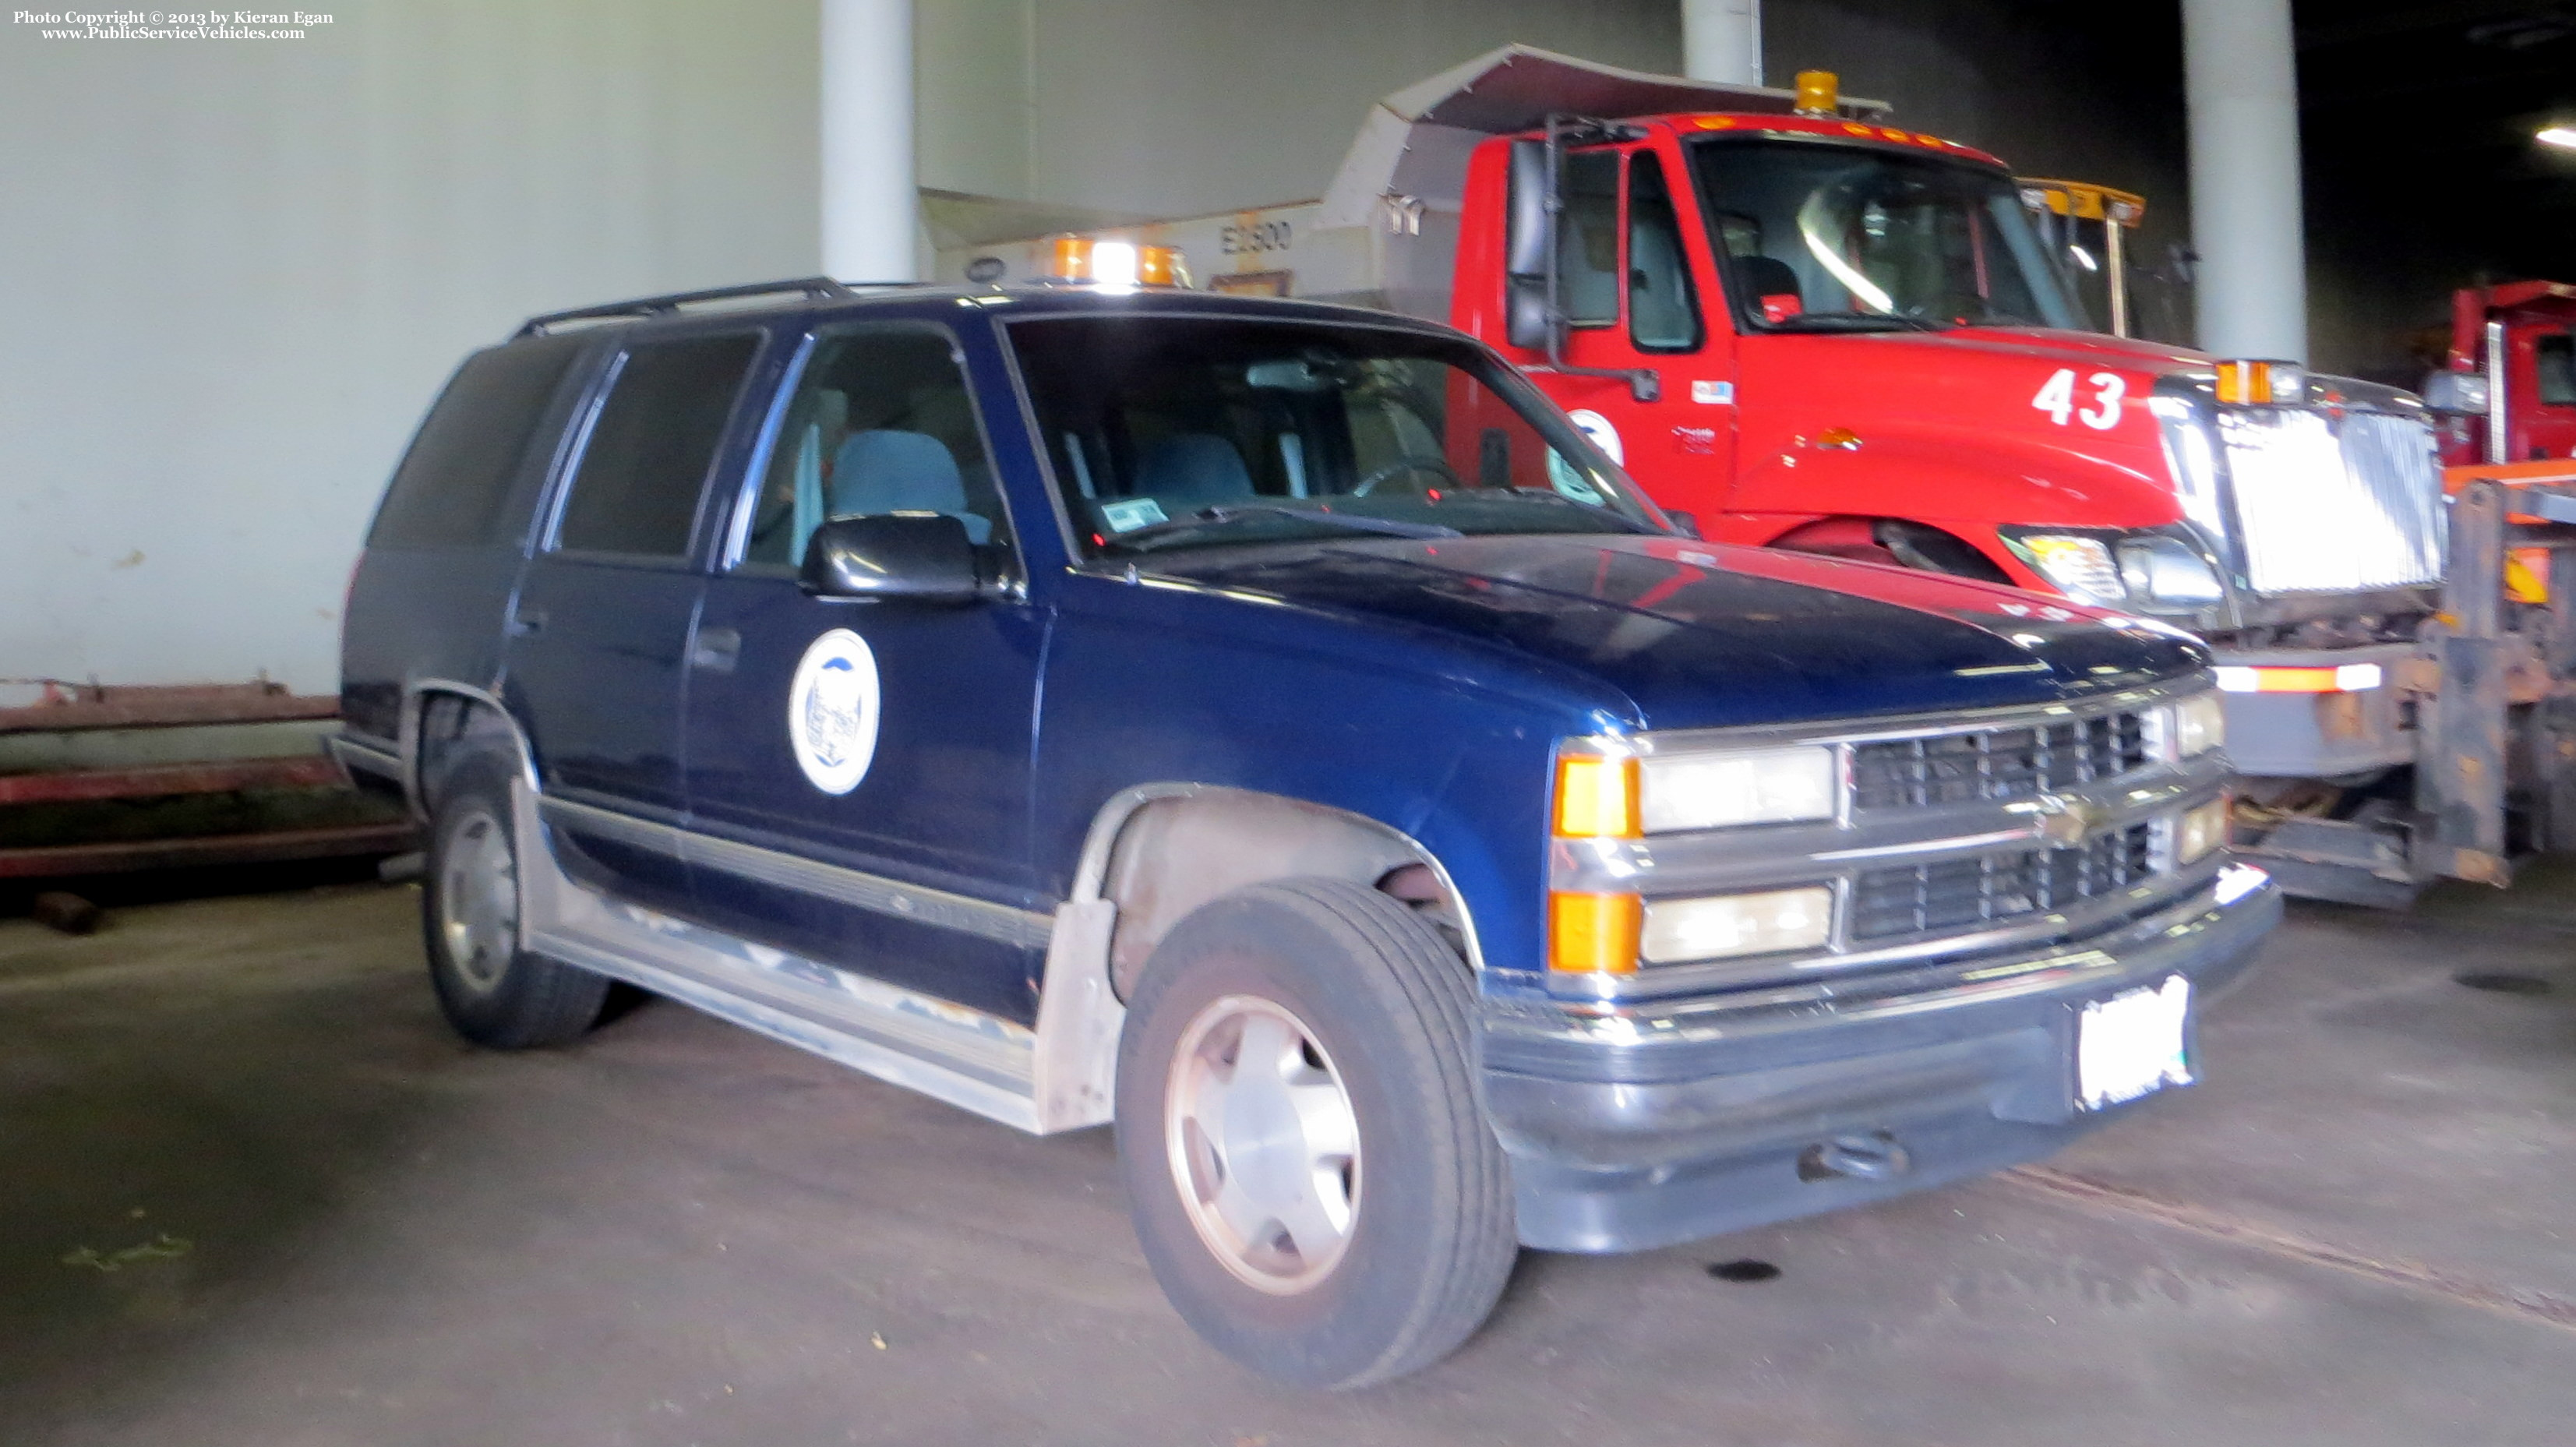 A photo  of Providence Traffic Engineering Division
            Truck 2600, a 1995-2000 Chevrolet Tahoe             taken by Kieran Egan